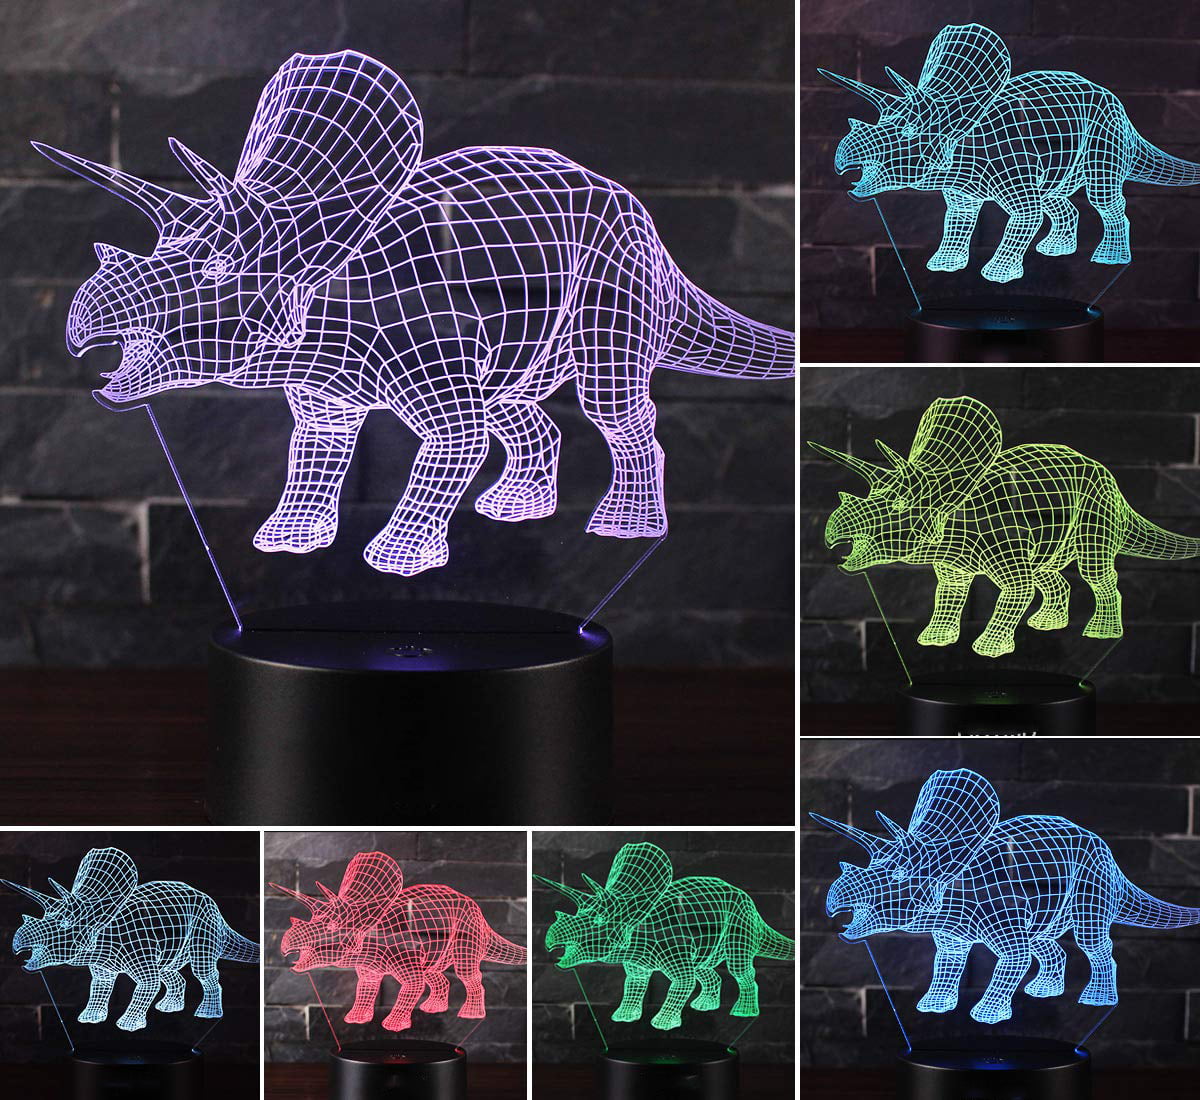 3D Dinosaur Night Light 3 Packs VSATEN 3D Illusion Lamp Three Pattern and 7 Color Change Decor Lamp with Remote Control for Living Bed Room Bar Best Gift Toys 